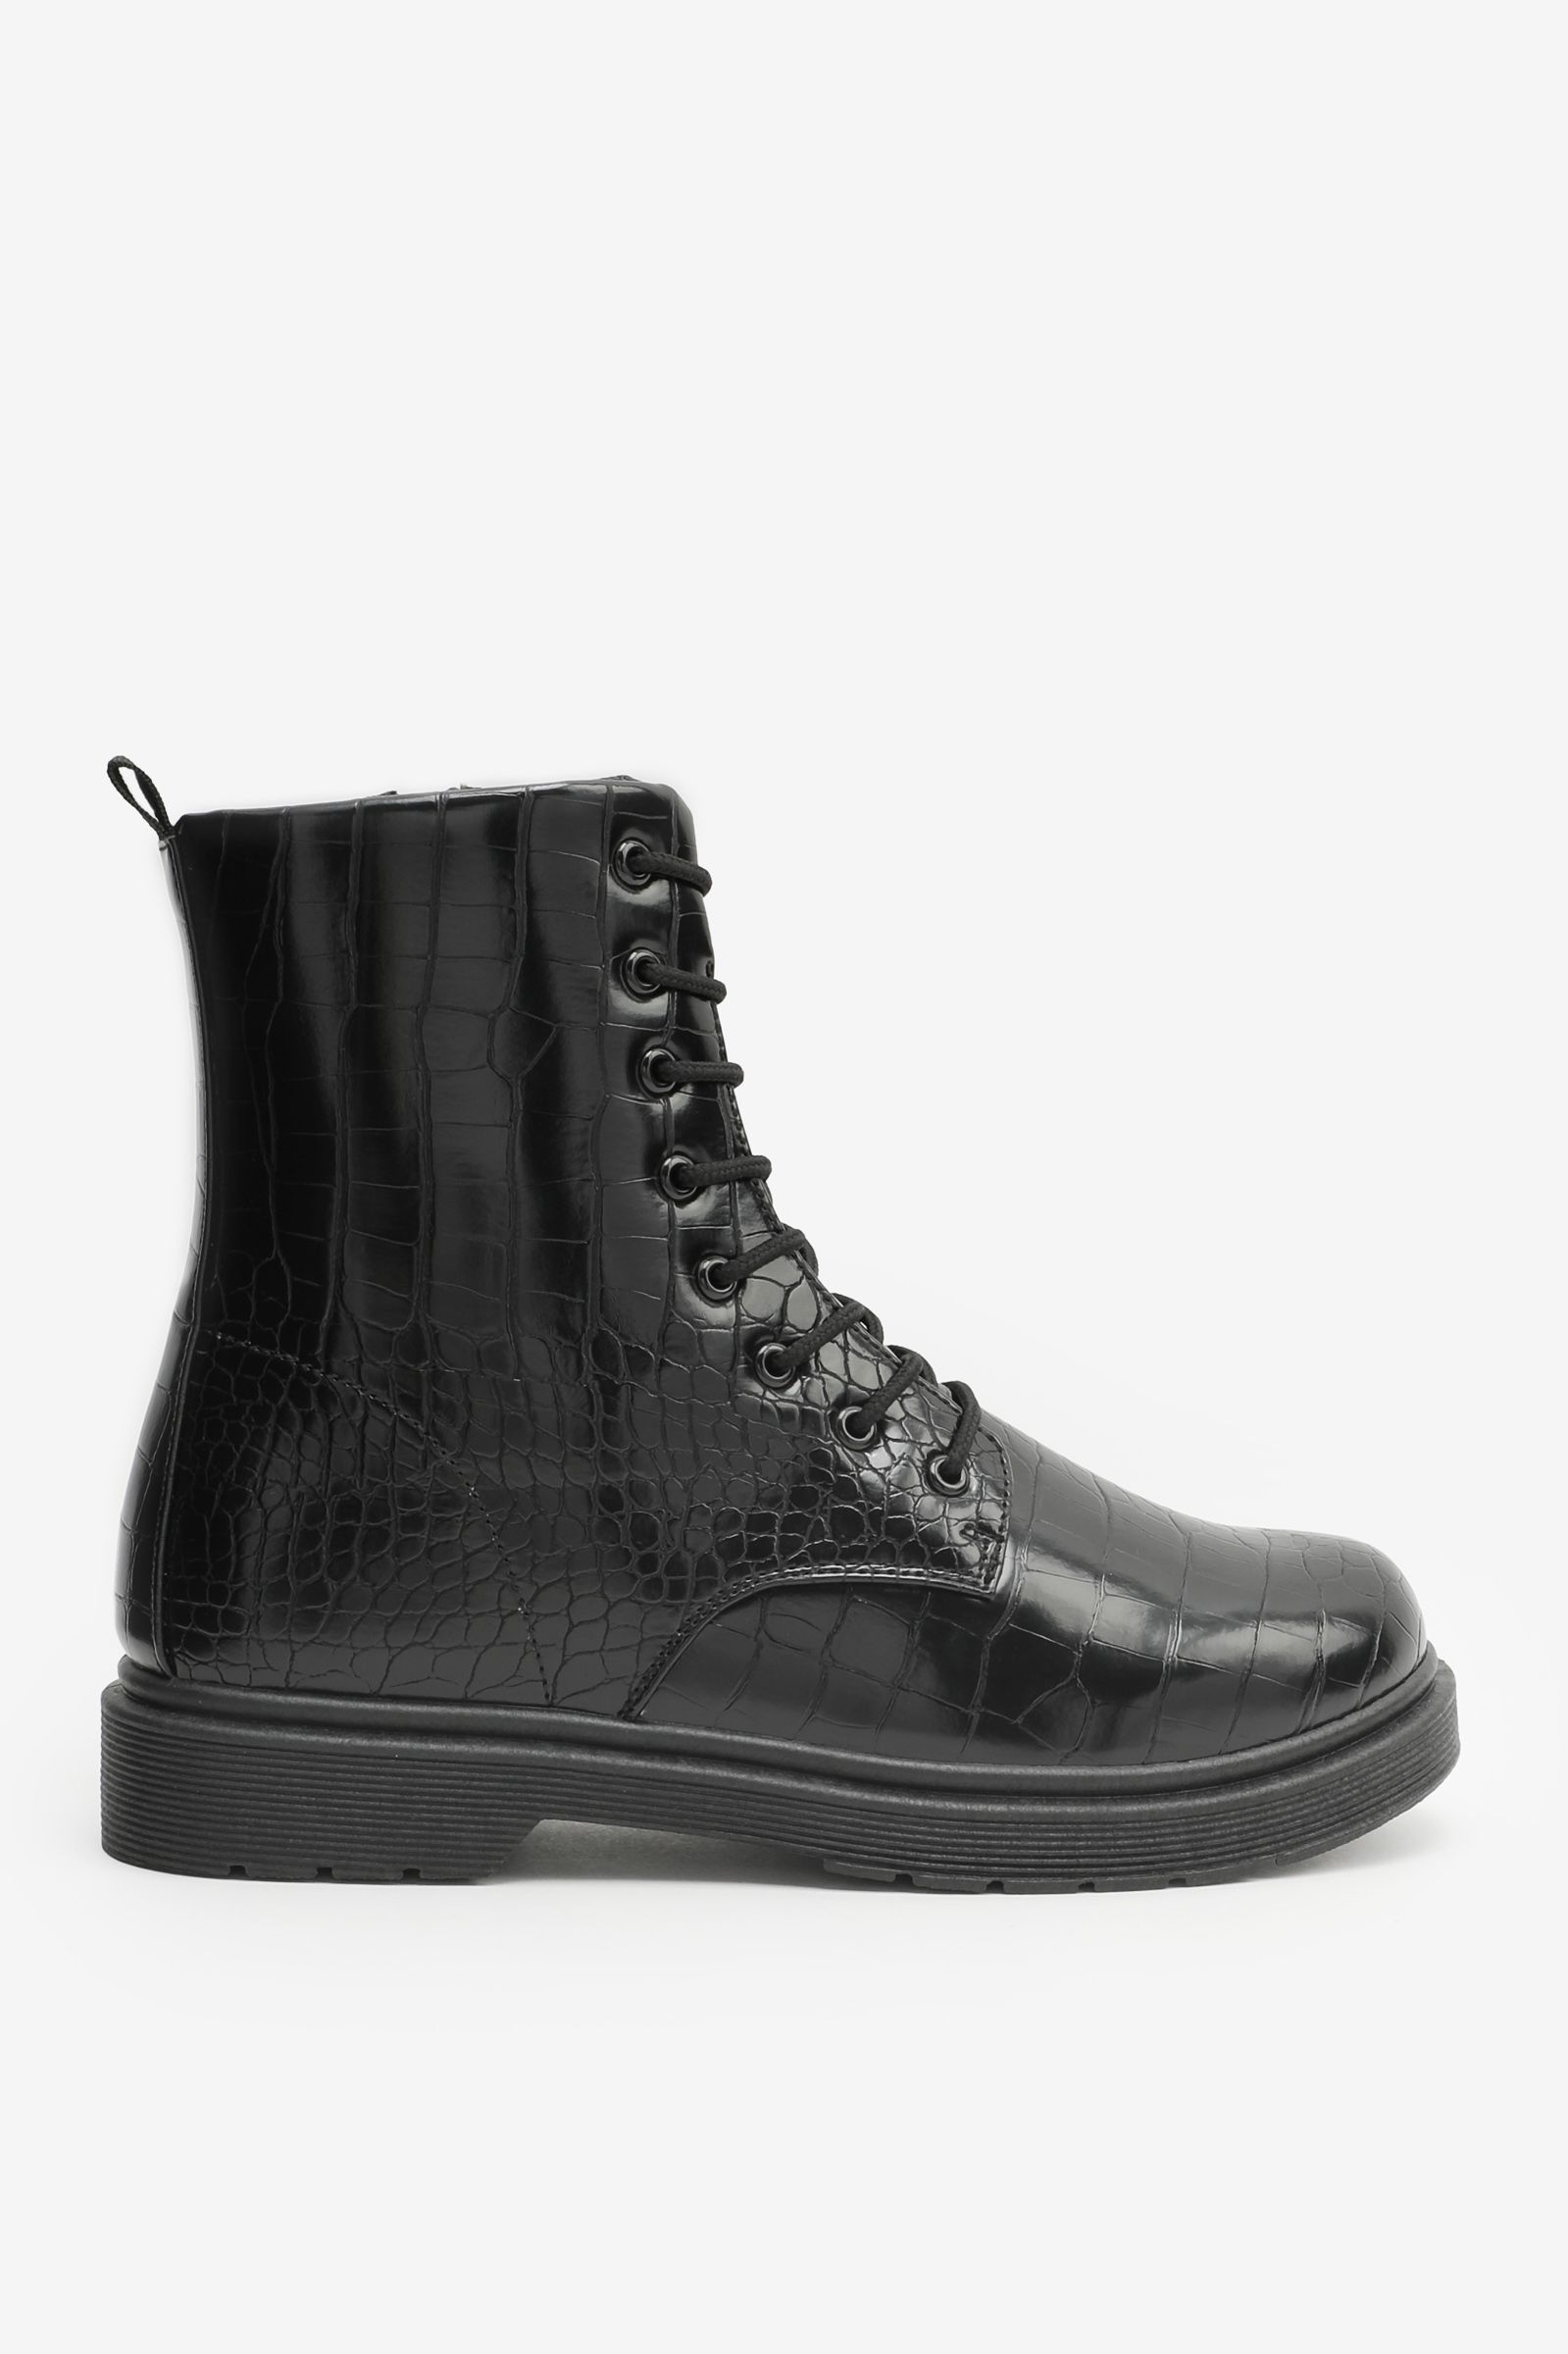 Croco Combat Boots with Injected Sole | Ardene